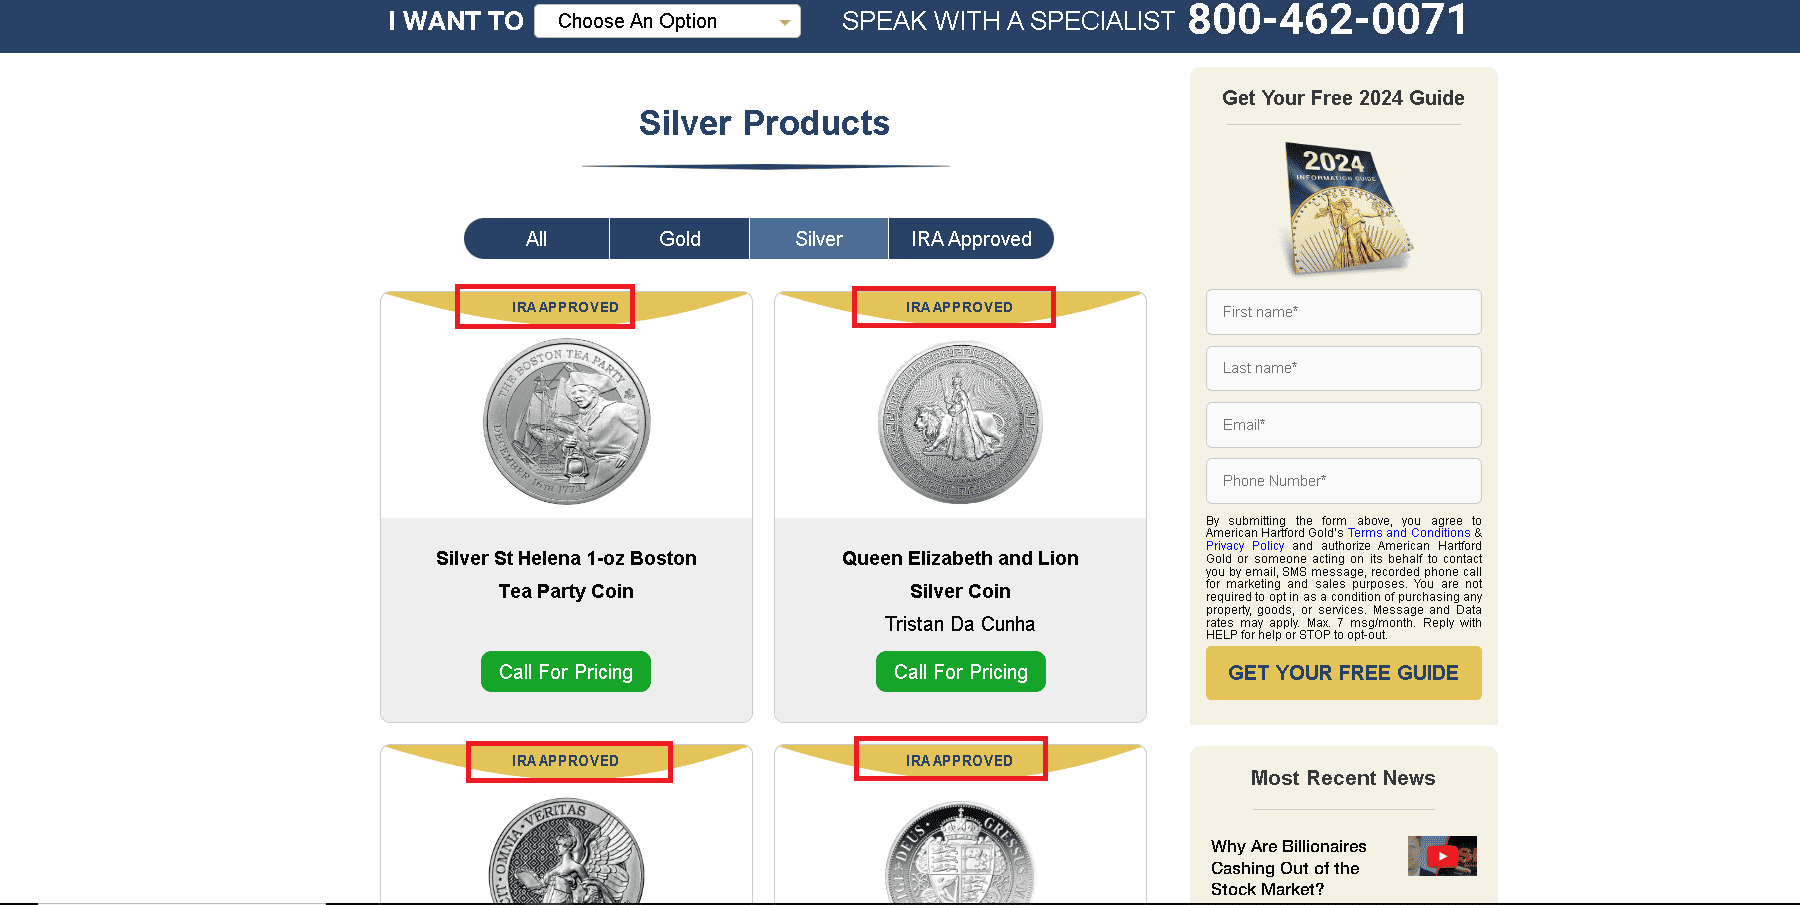 American Hartford Gold sell IRA-approved coins